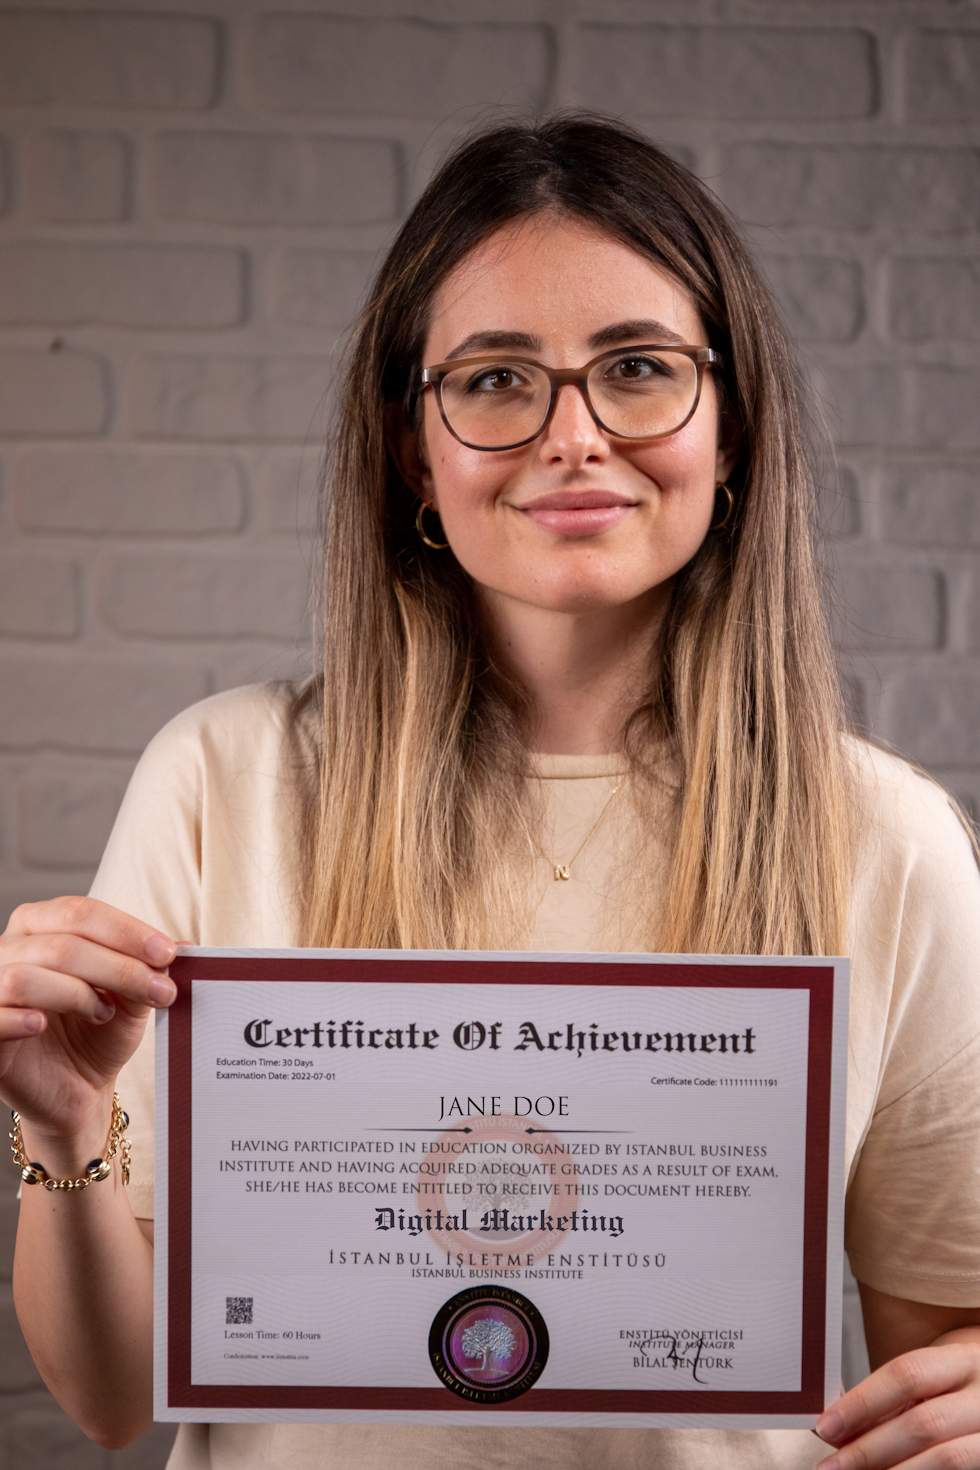 A woman holding a digital marketing certificate. The background is a stone wall. There is a diploma, a certificate from the university.